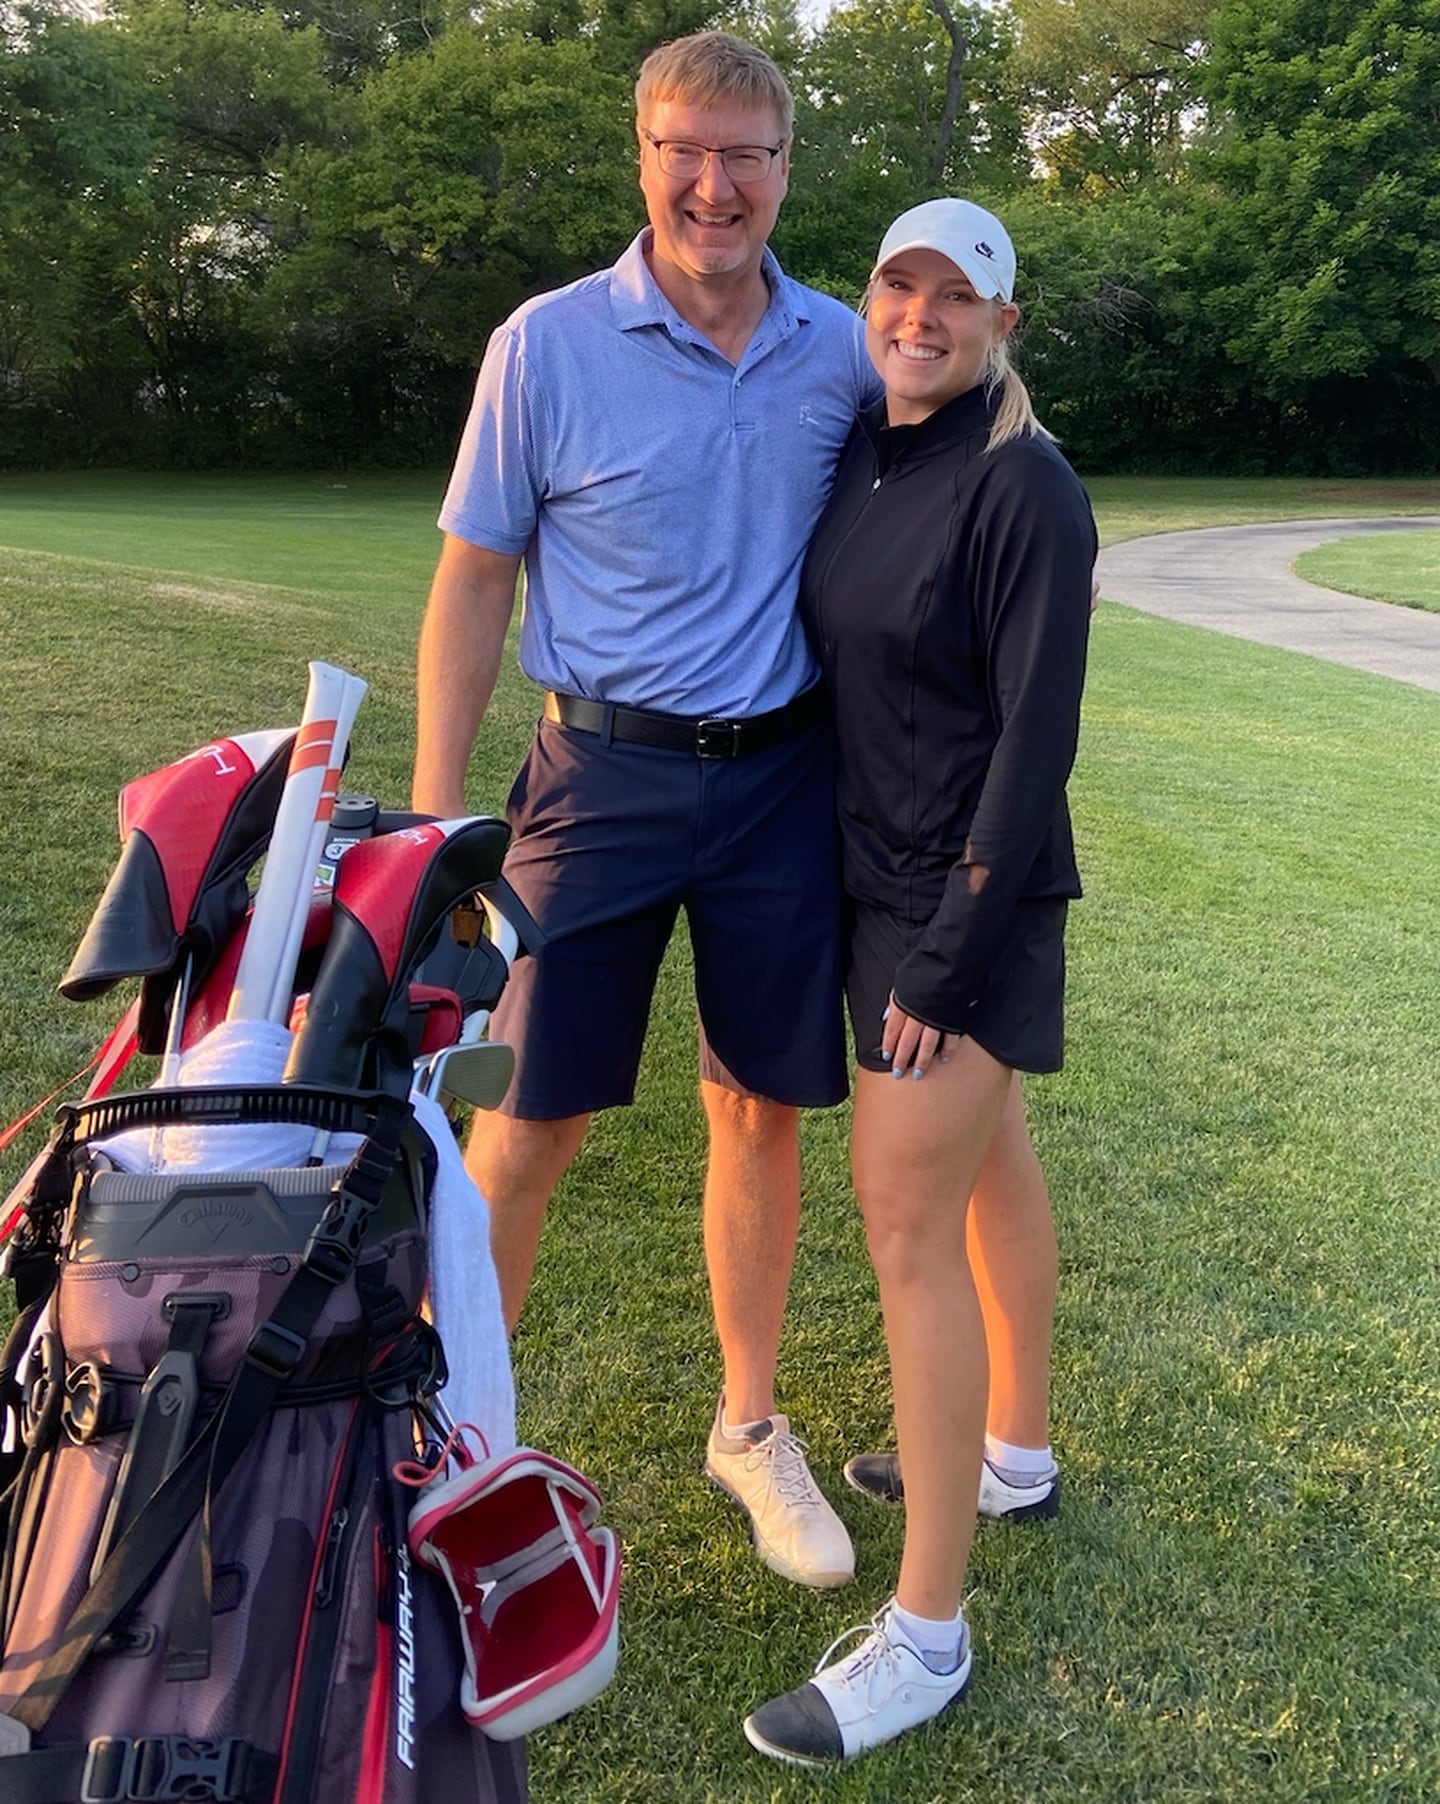 Spring Grove's Mackenzie Hahn (right) and her dad, Ron, pose for a picture at Palatine Golf Club on Wednesday. Mackenzie Hahn qualified for the U.S. Women's Open, held July 6-9 at Pebble Beach, California.